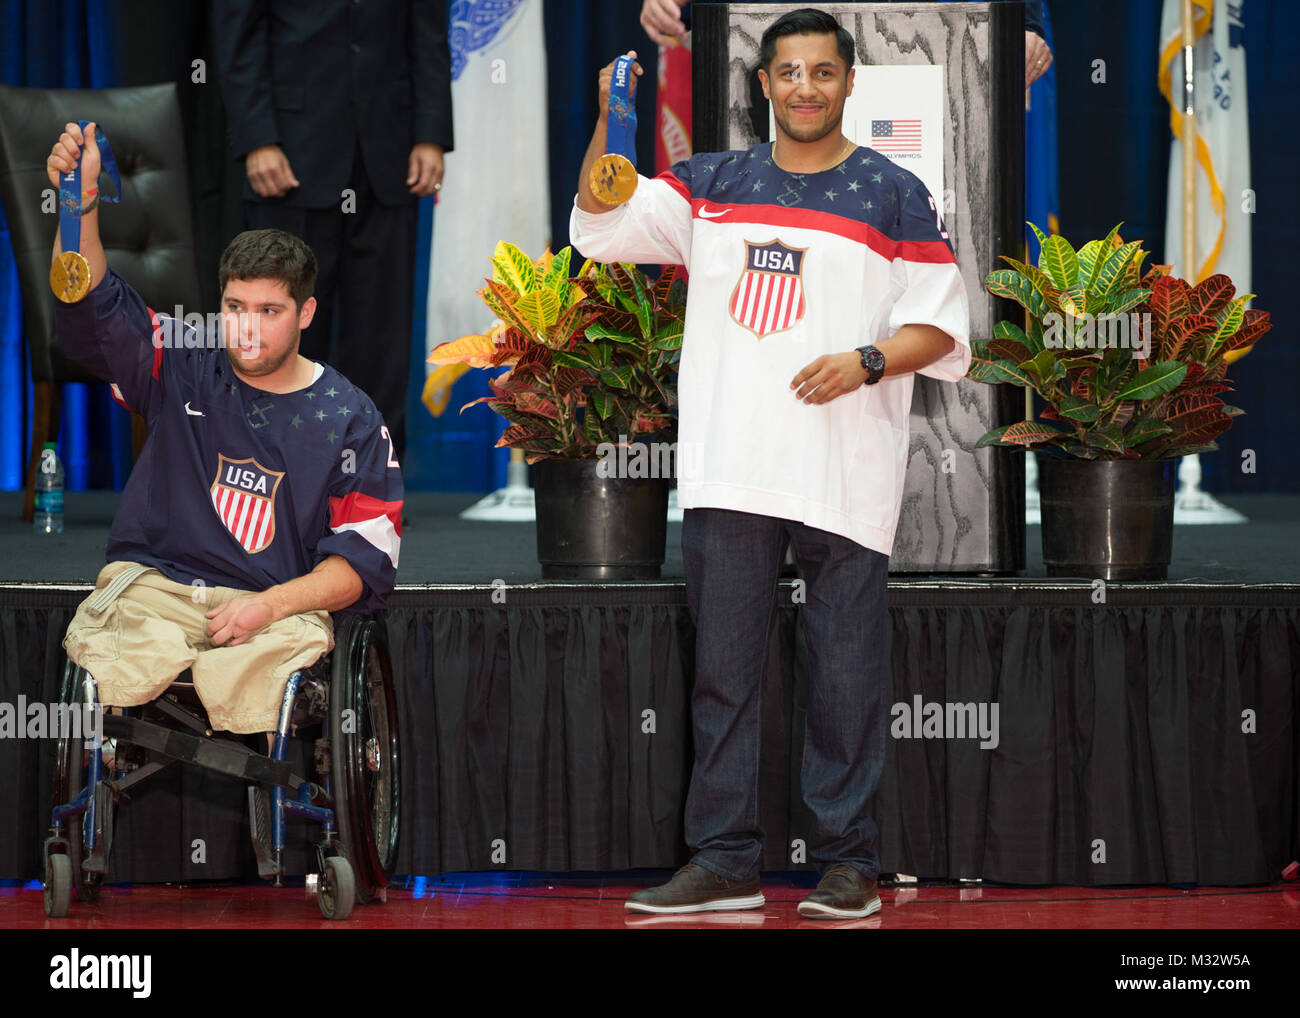 Retired Marine Cpl. Paul Schaus (left) and retired Army Staff Sgt. Rico Roman (right) hold up their gold medals during the opening ceremony of the 2014 Warrior Games, U.S. Olympic Training Center, Colorado Springs, Colorado, Sept 28, 2014. Founded in 2010, the Games are designed to introduce wounded, ill and injured service members and veterans to adaptive sports and encourage them to stay physically active. (U.S. Air Force photo by Senior Airman Justyn M. Freeman/ Released) 140928-F-RN544-076.jpg by Air Force Wounded Warrior Stock Photo